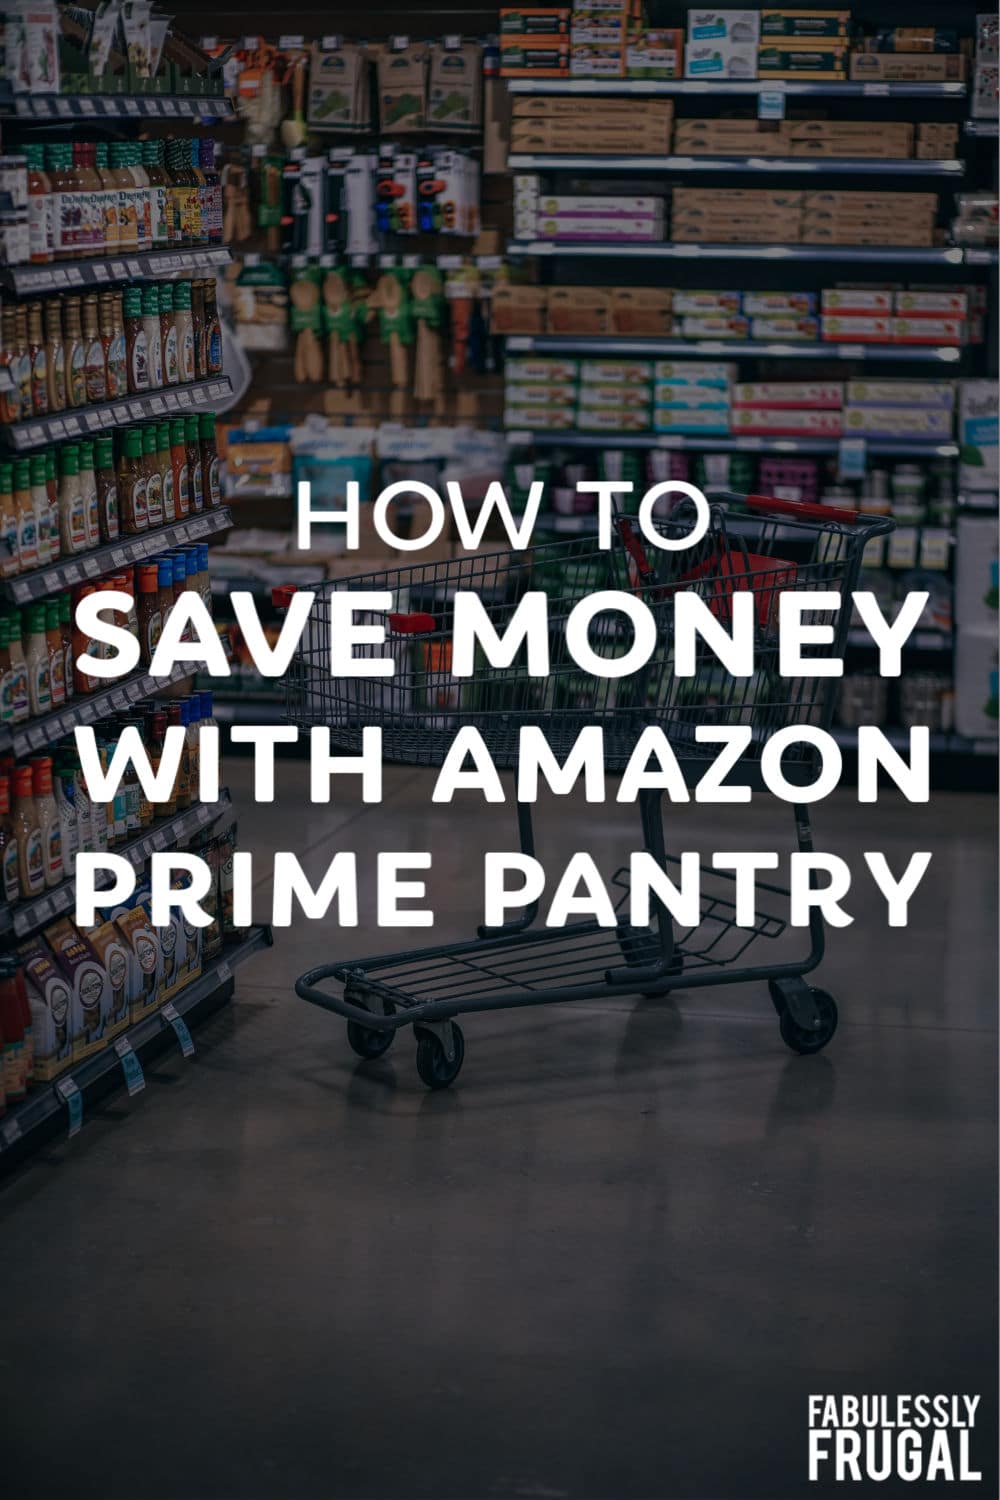 How to save with Amazon Prime Pantry